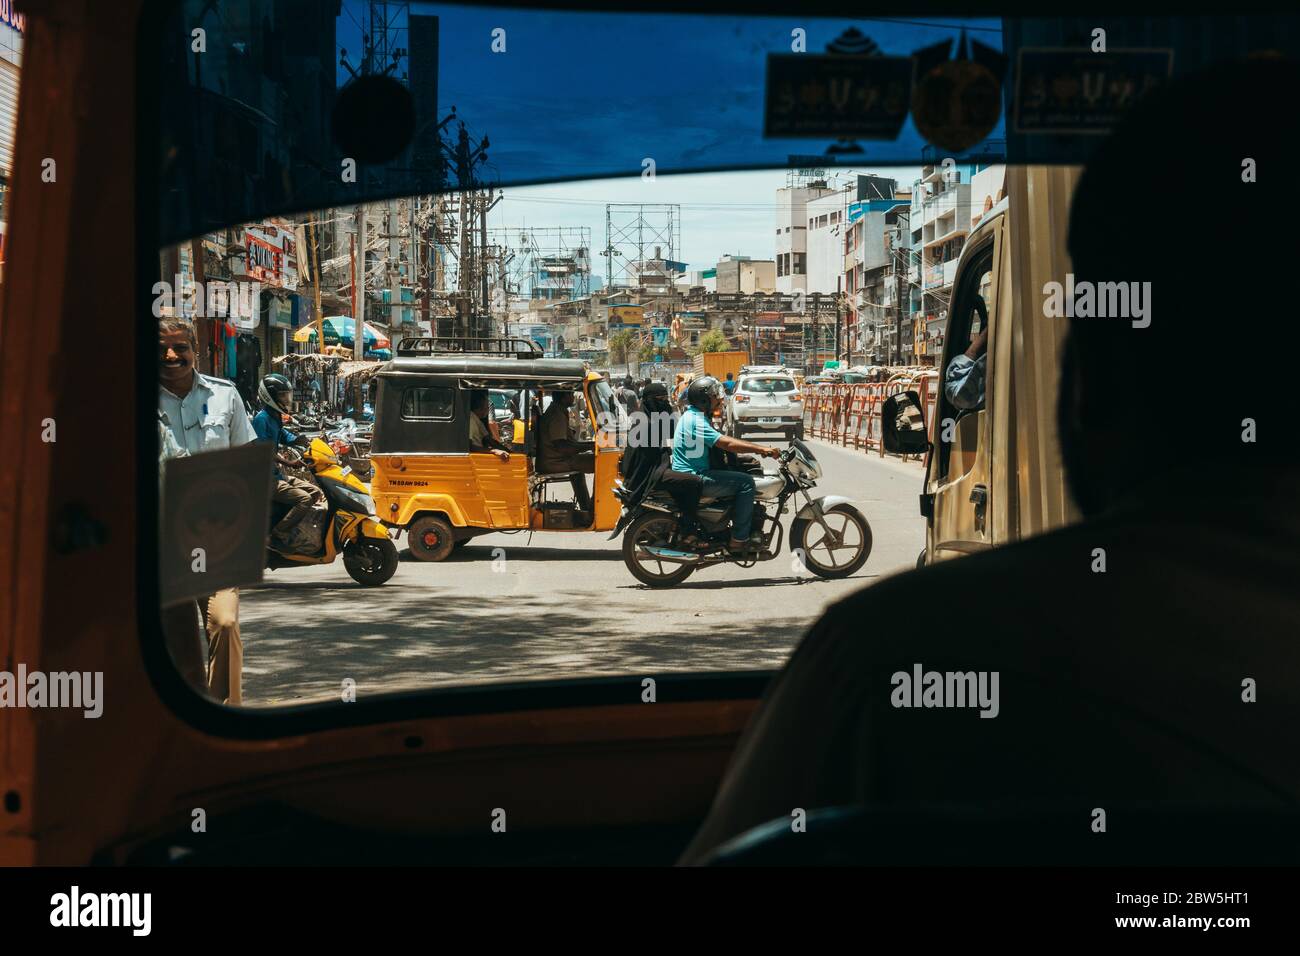 Traffic crosses at an intersection in Madurai, India. Seen from the passenger seat of an auto rickshaw Stock Photo